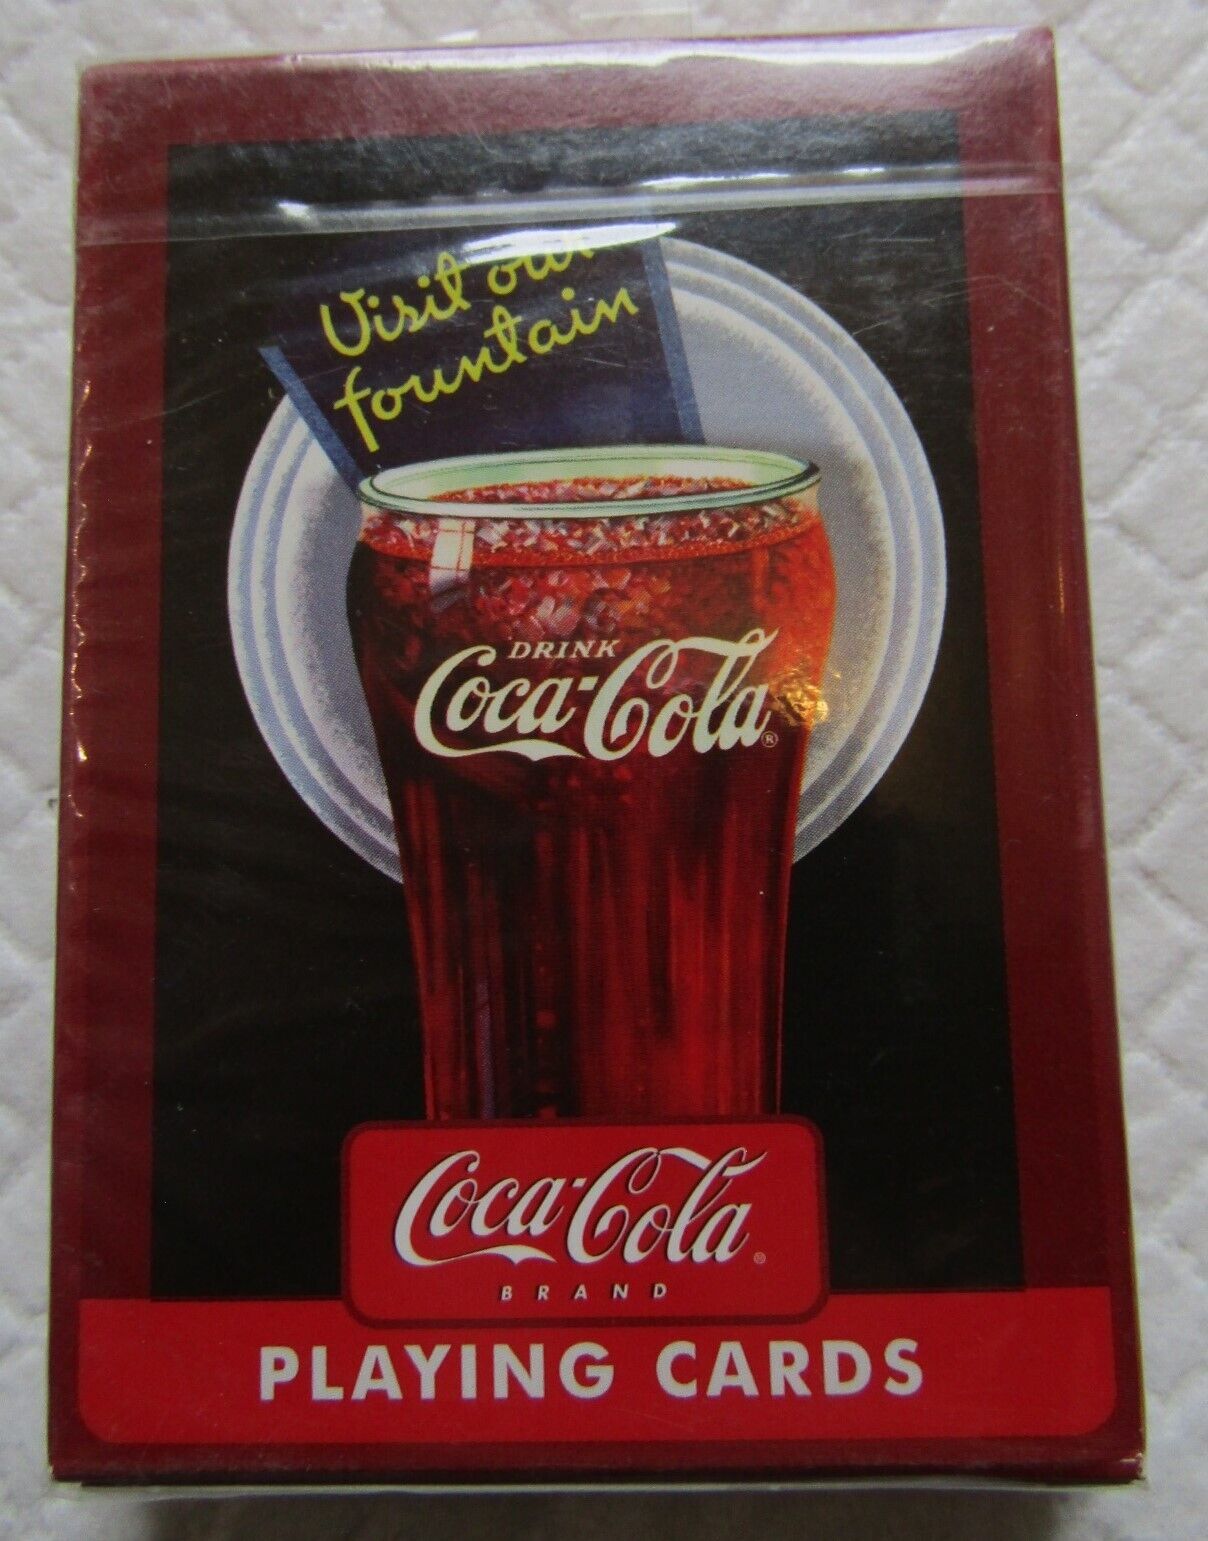 VINTAGE  FACTORY  SEALED BICYCLE PLAYING CARDS DECK COCA-COLA VISIT OUR FOUNTAIN